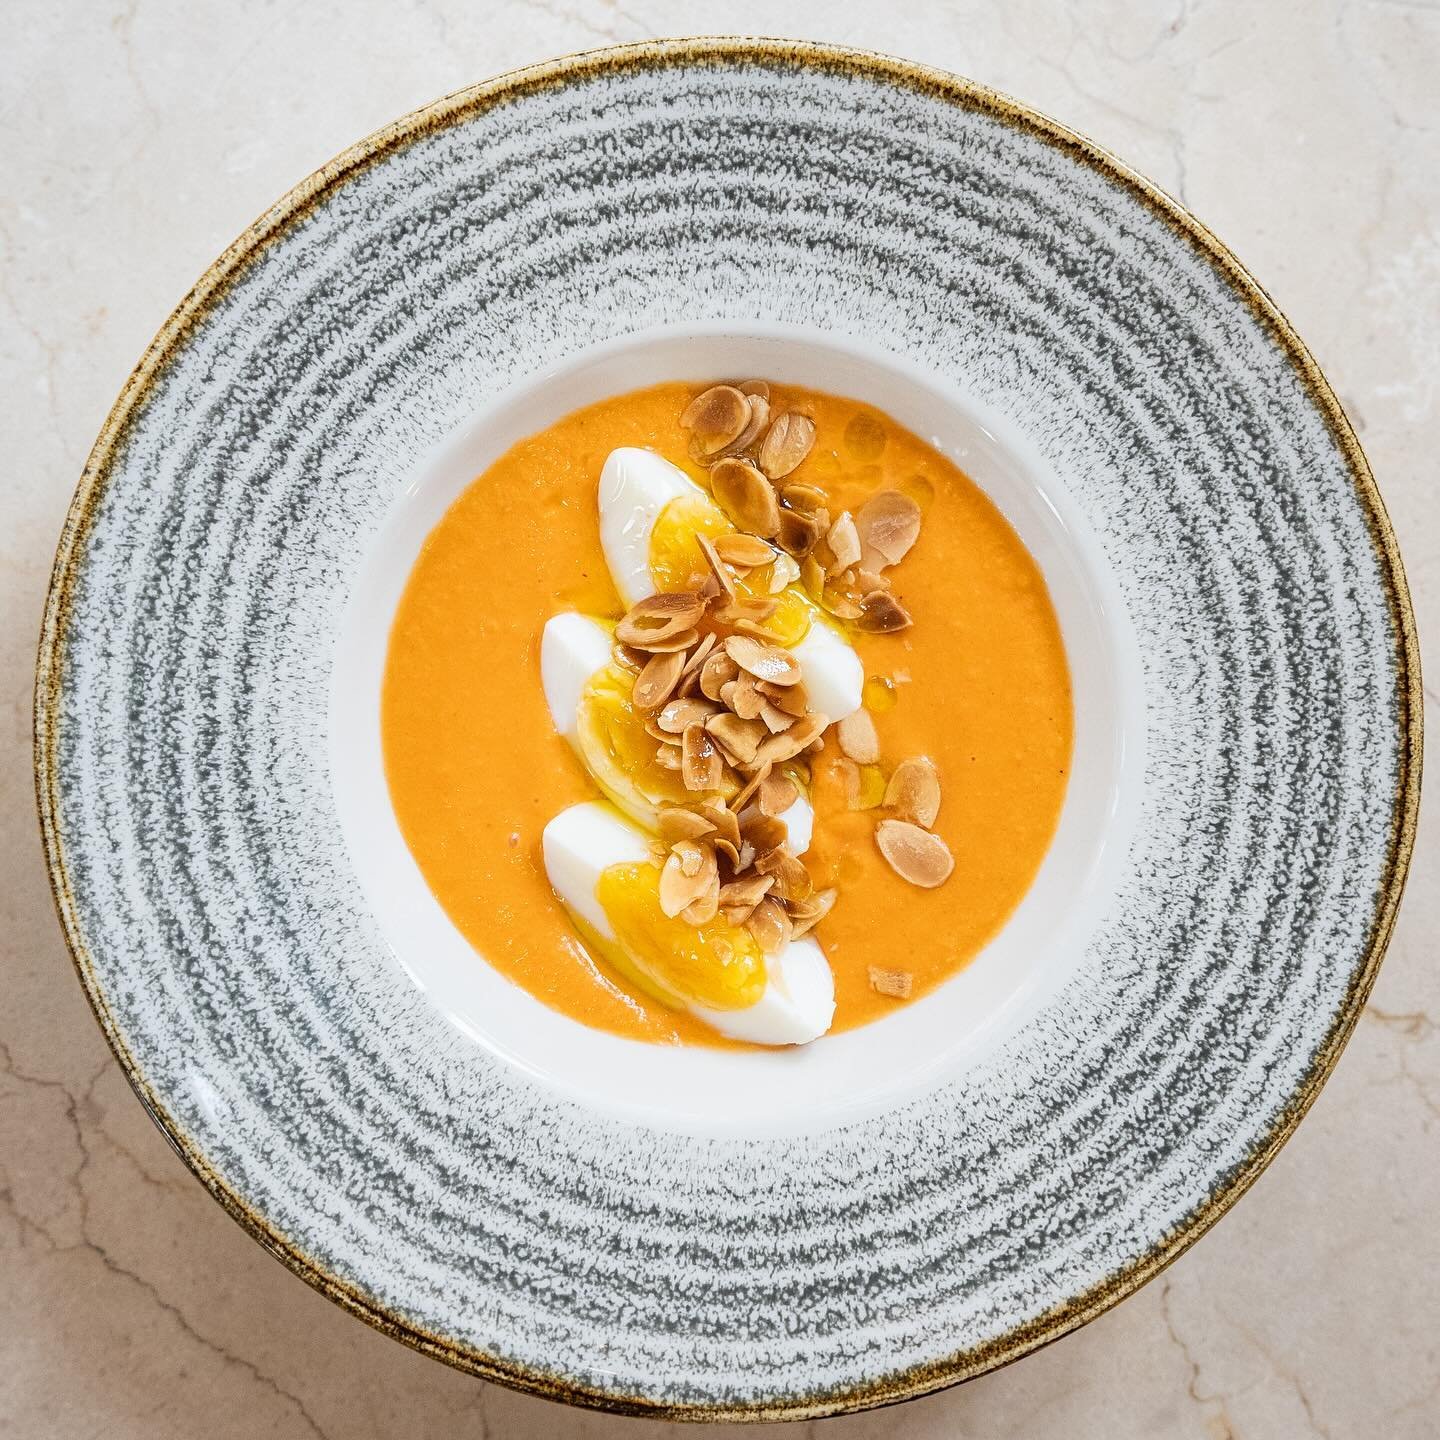 Bringing in the sunny, springtime vibes with our Salmorejo - a chilled tomato soup served with a hard-boiled egg &amp; almonds ☀️
.
.
.
.
#EnglandsGrace #lunch #spring #stjohnswood #londonfood #londonrestaurants #londfoodie